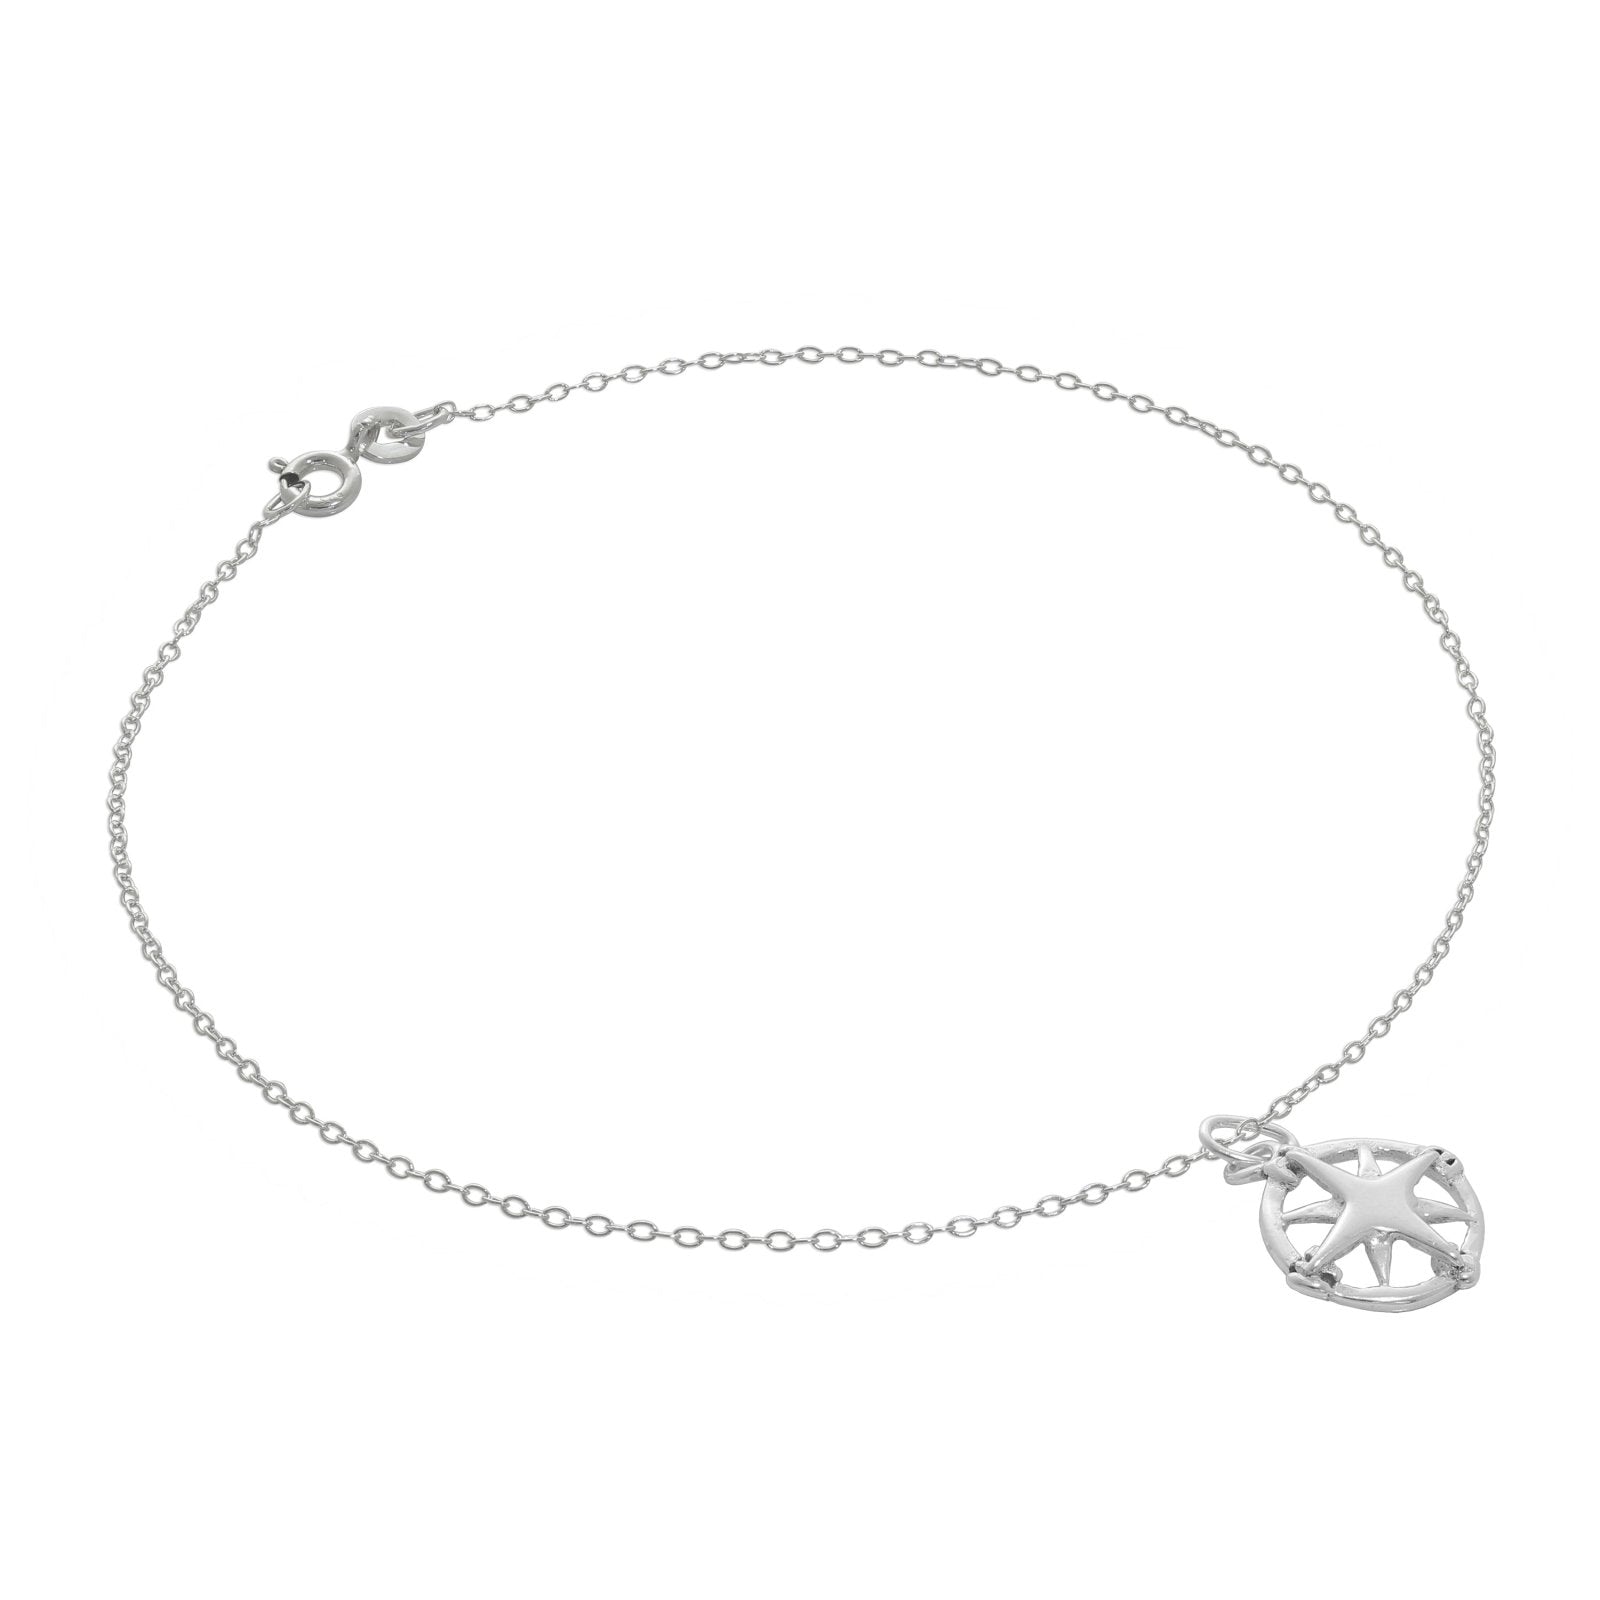 Fine Sterling Silver Belcher Anklet with Compass Charm - 10 Inches - jewellerybox